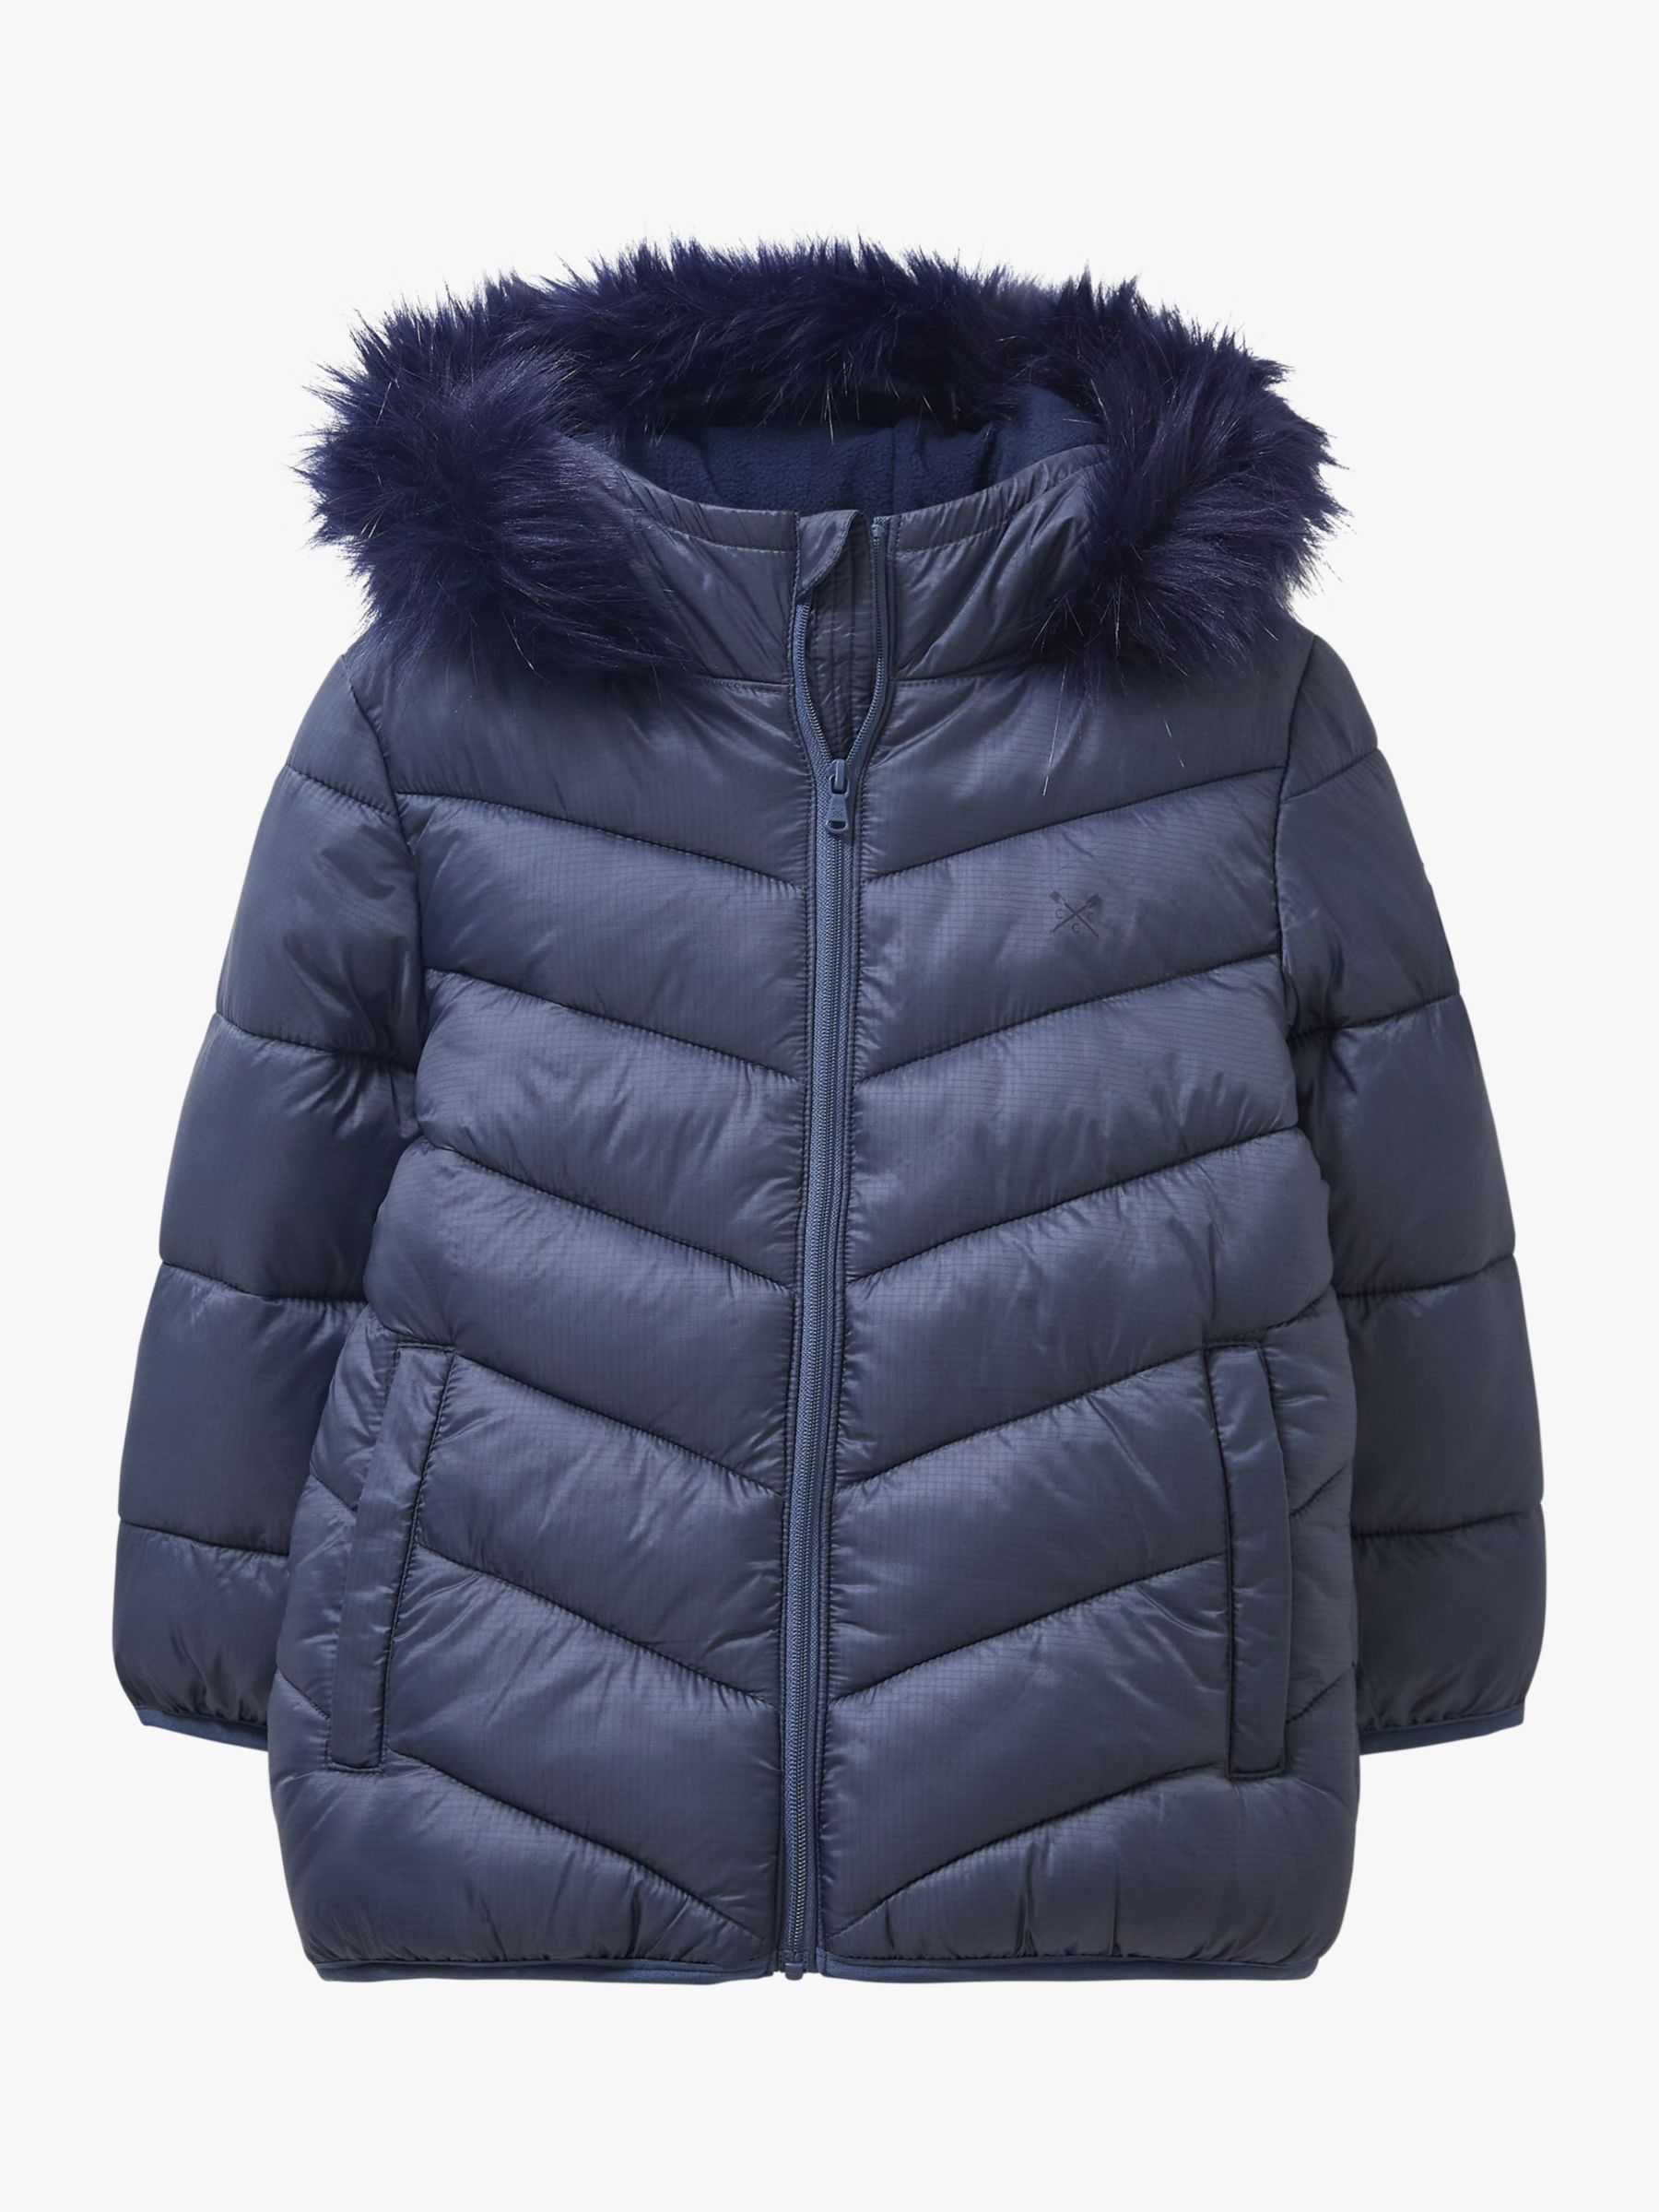 Crew Clothing Kids' Lightweight Fur Trim Hooded Quilted Jacket, Navy ...